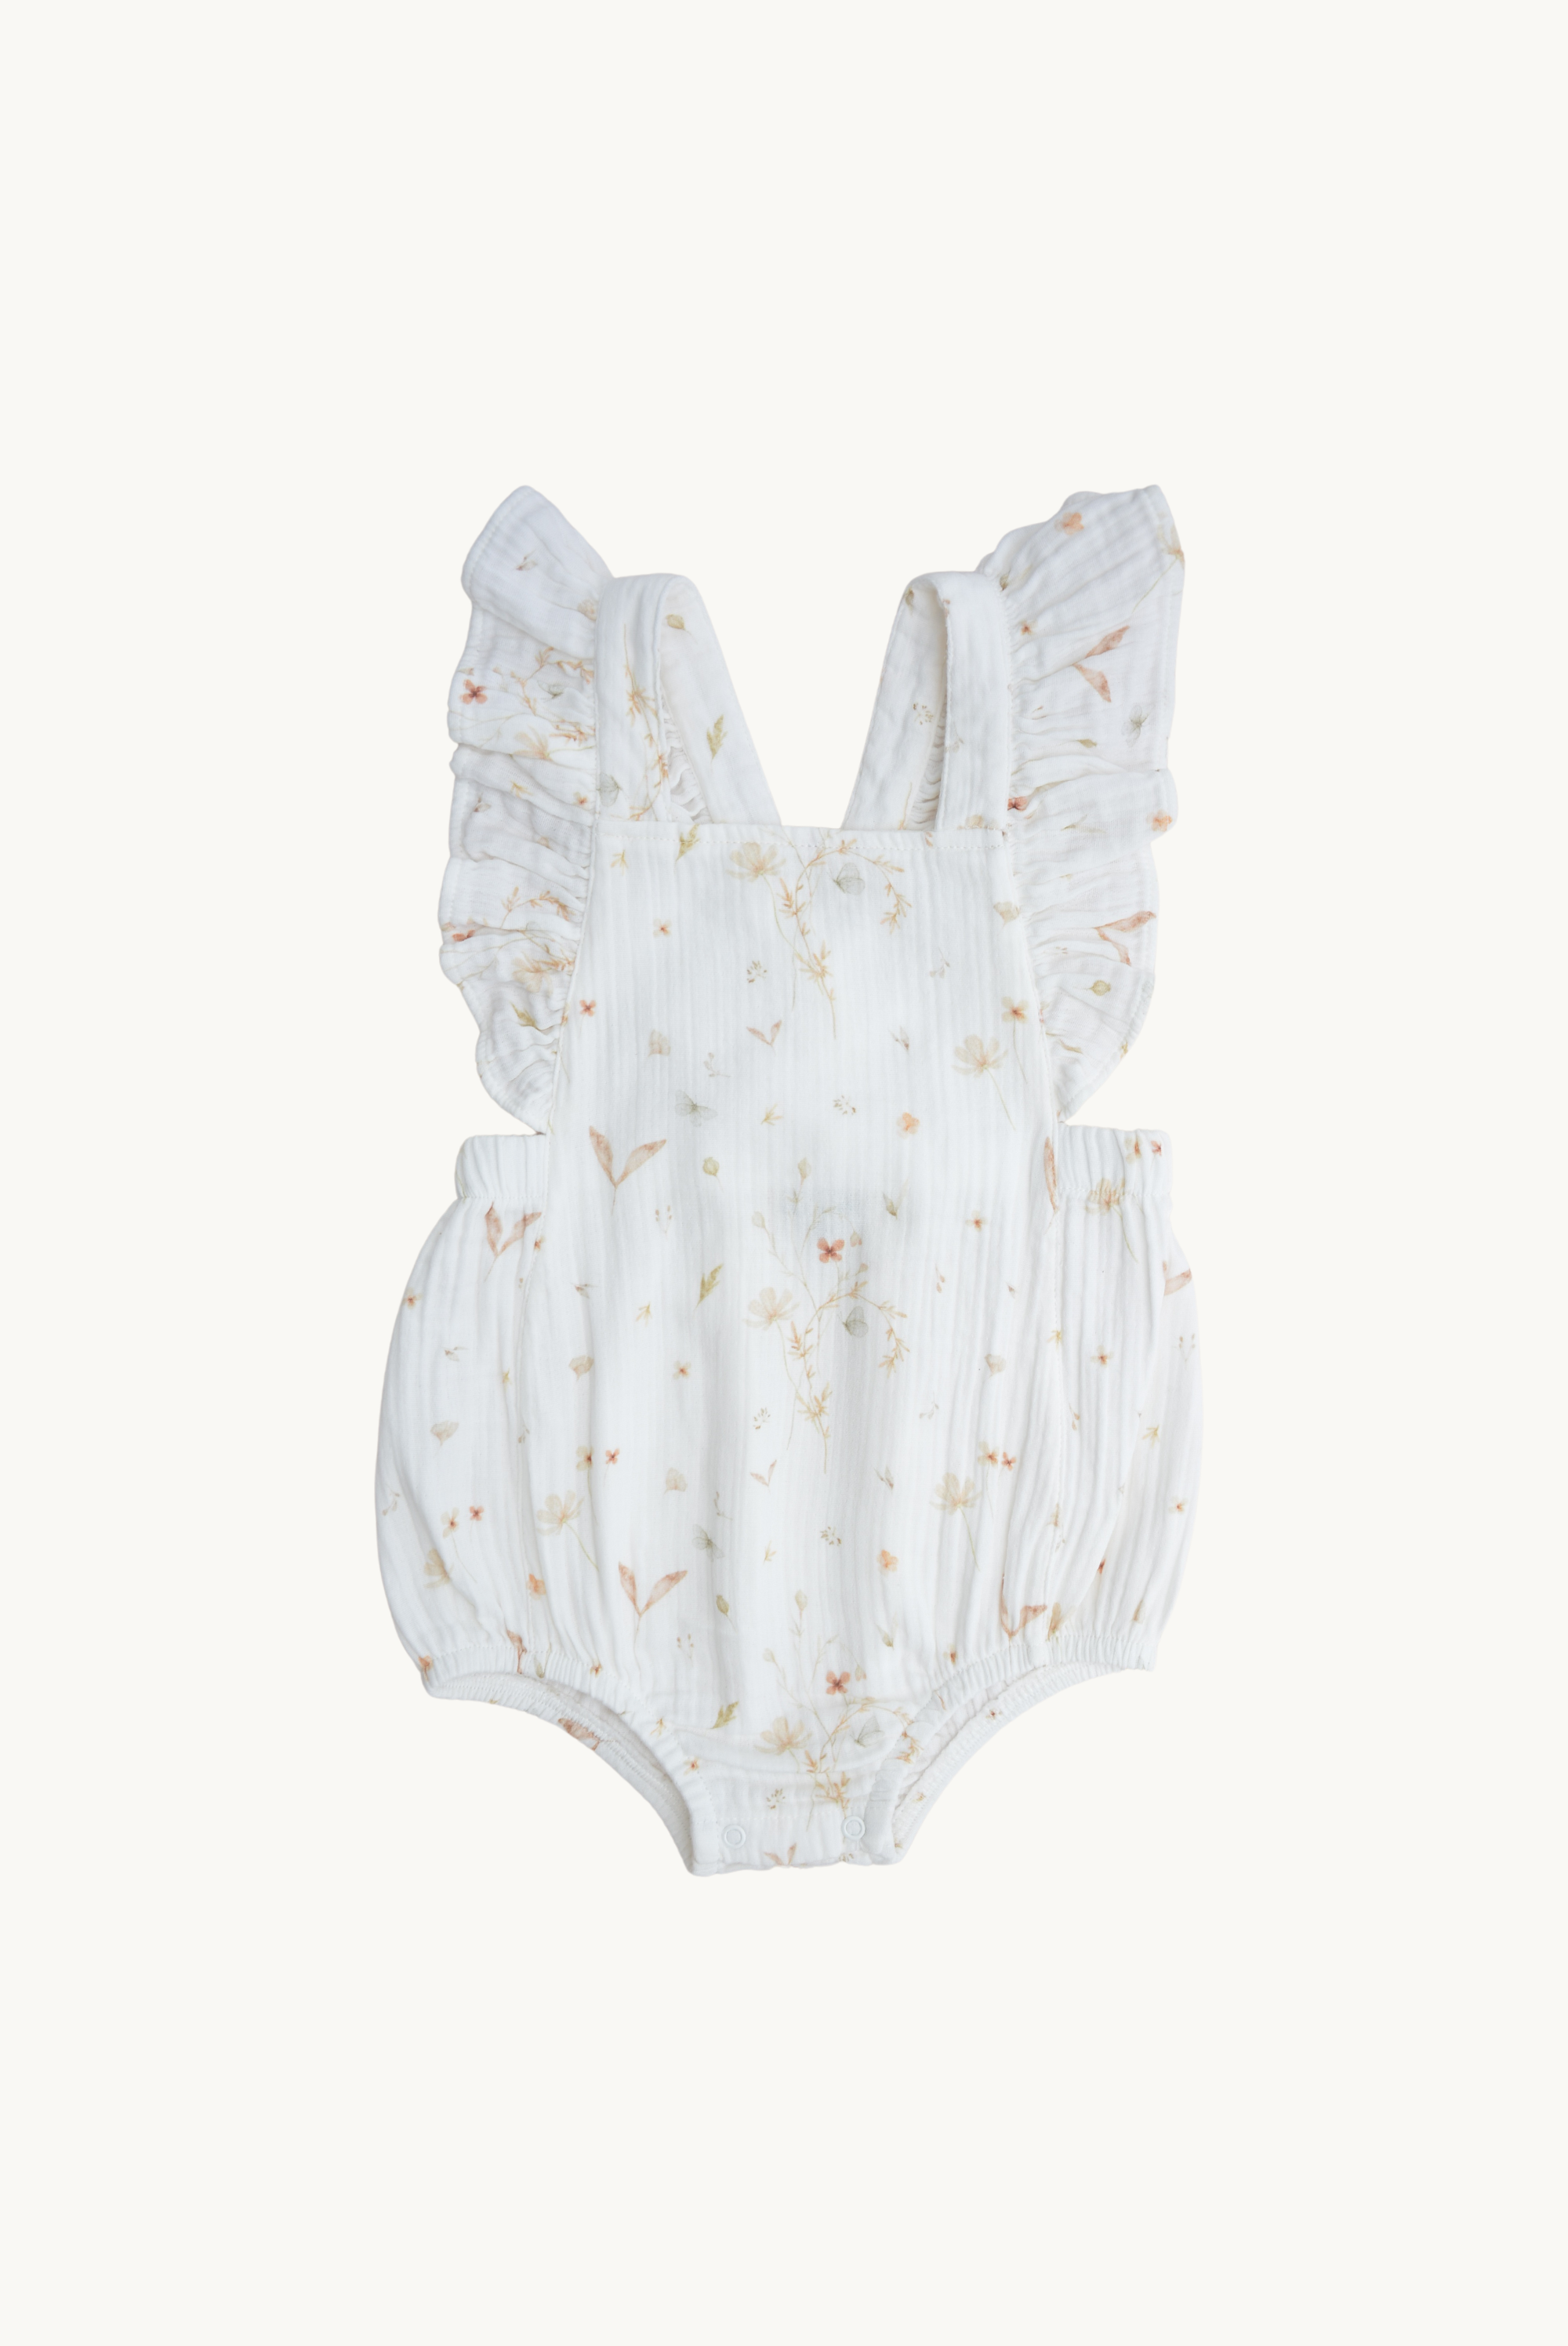 LUNA Romper - White with floral print * Baby muslin romper made from 100% cotton